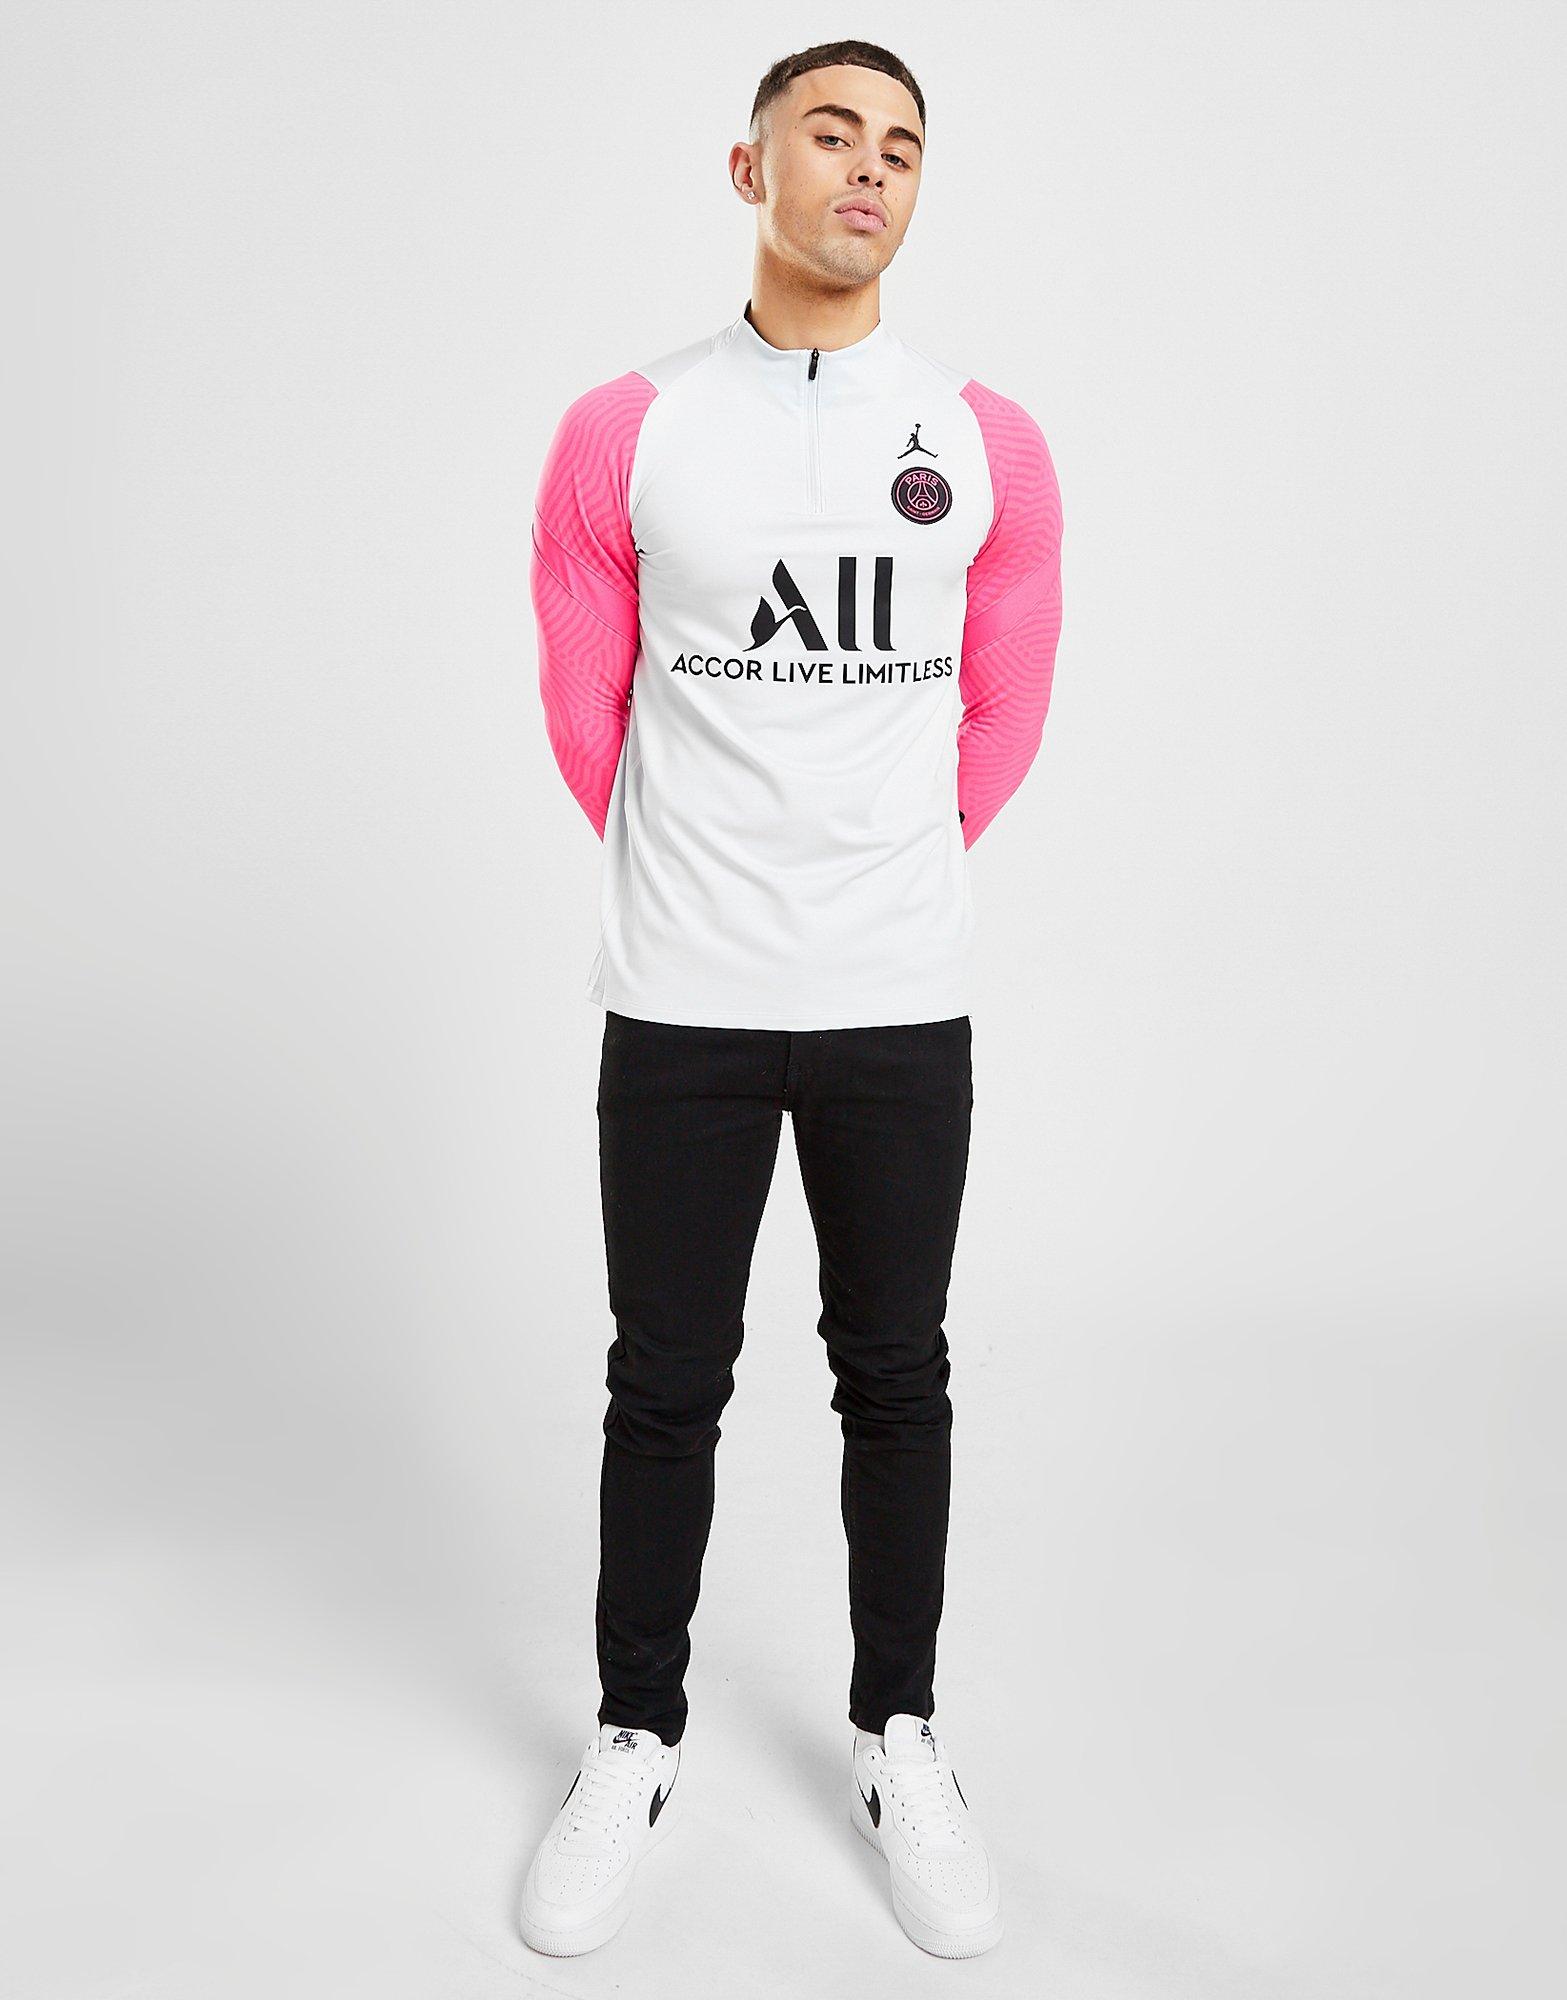 psg pink drill top